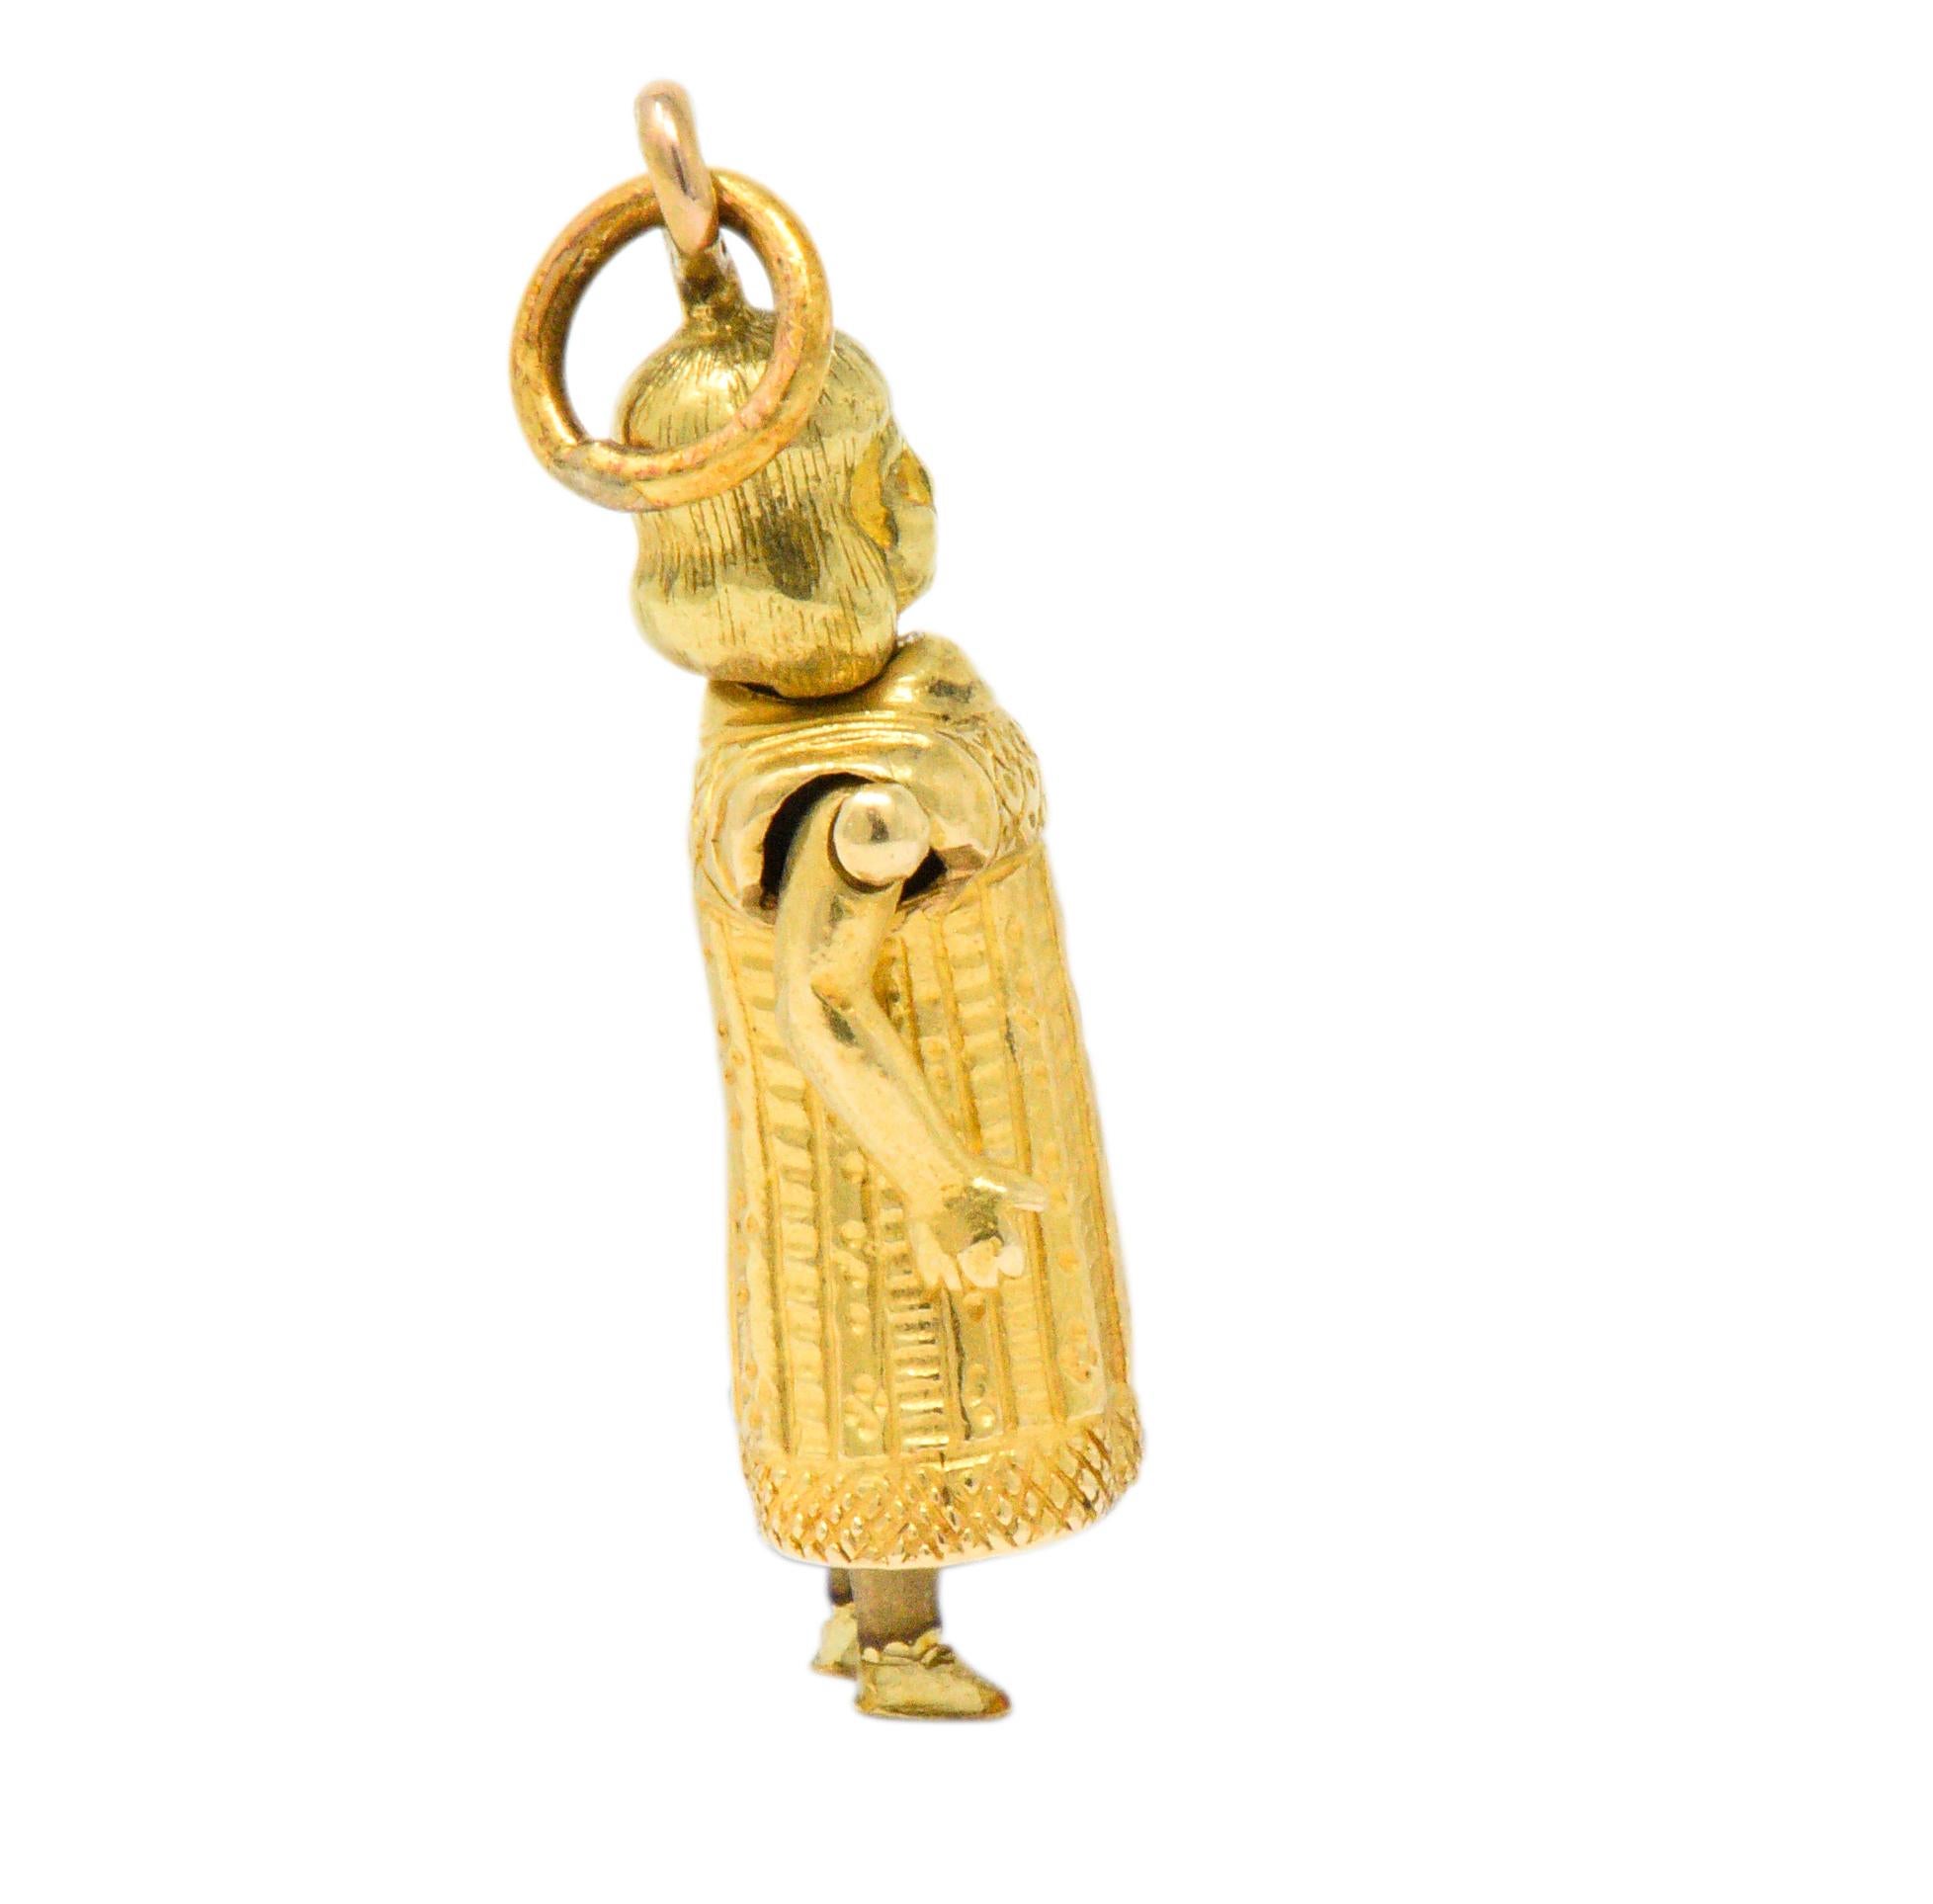 Featuring an 18kt yellow gold charm of a young girl

Articulated and providing movement of individual arms and legs

Intricately decorated dress

Tested as 18kt gold and French in origin

Circa 1890

Measures 18 mm x 8 mm

Dainty. Endearing.